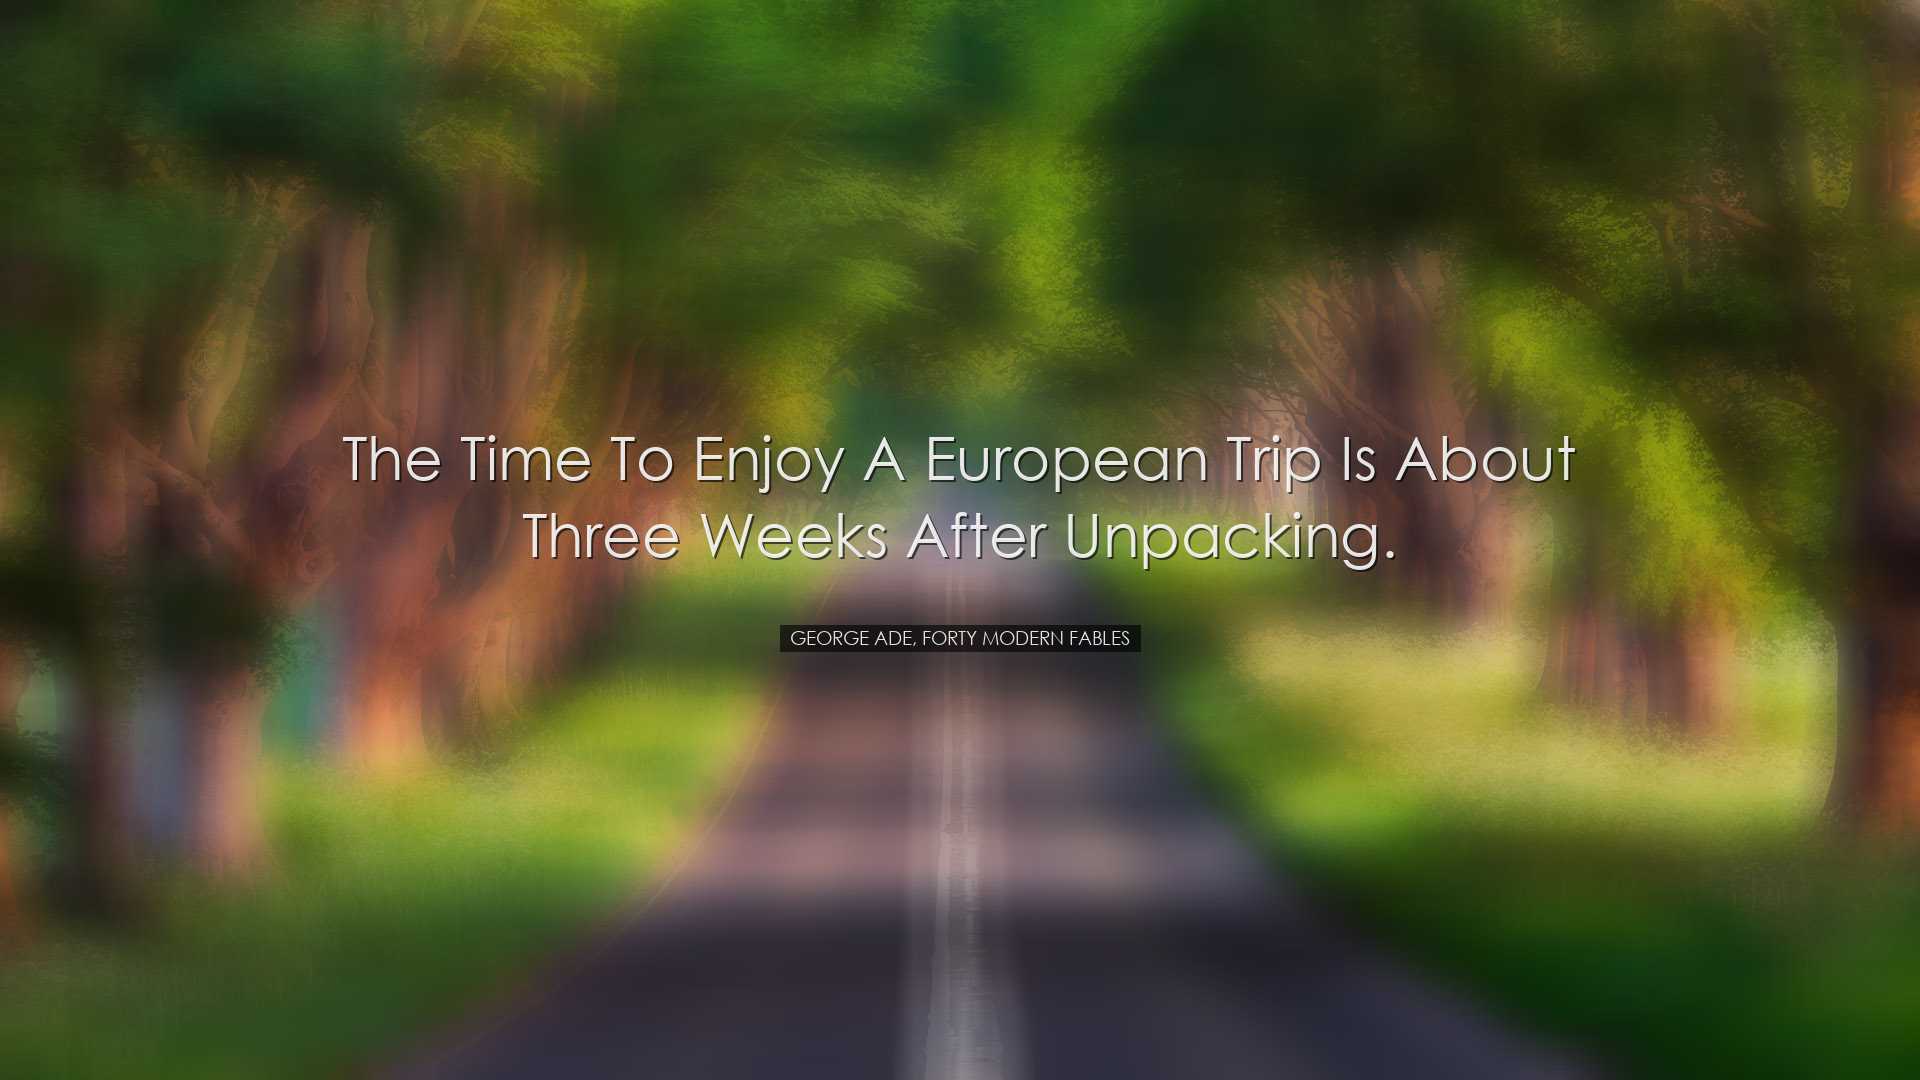 The time to enjoy a European trip is about three weeks after unpac